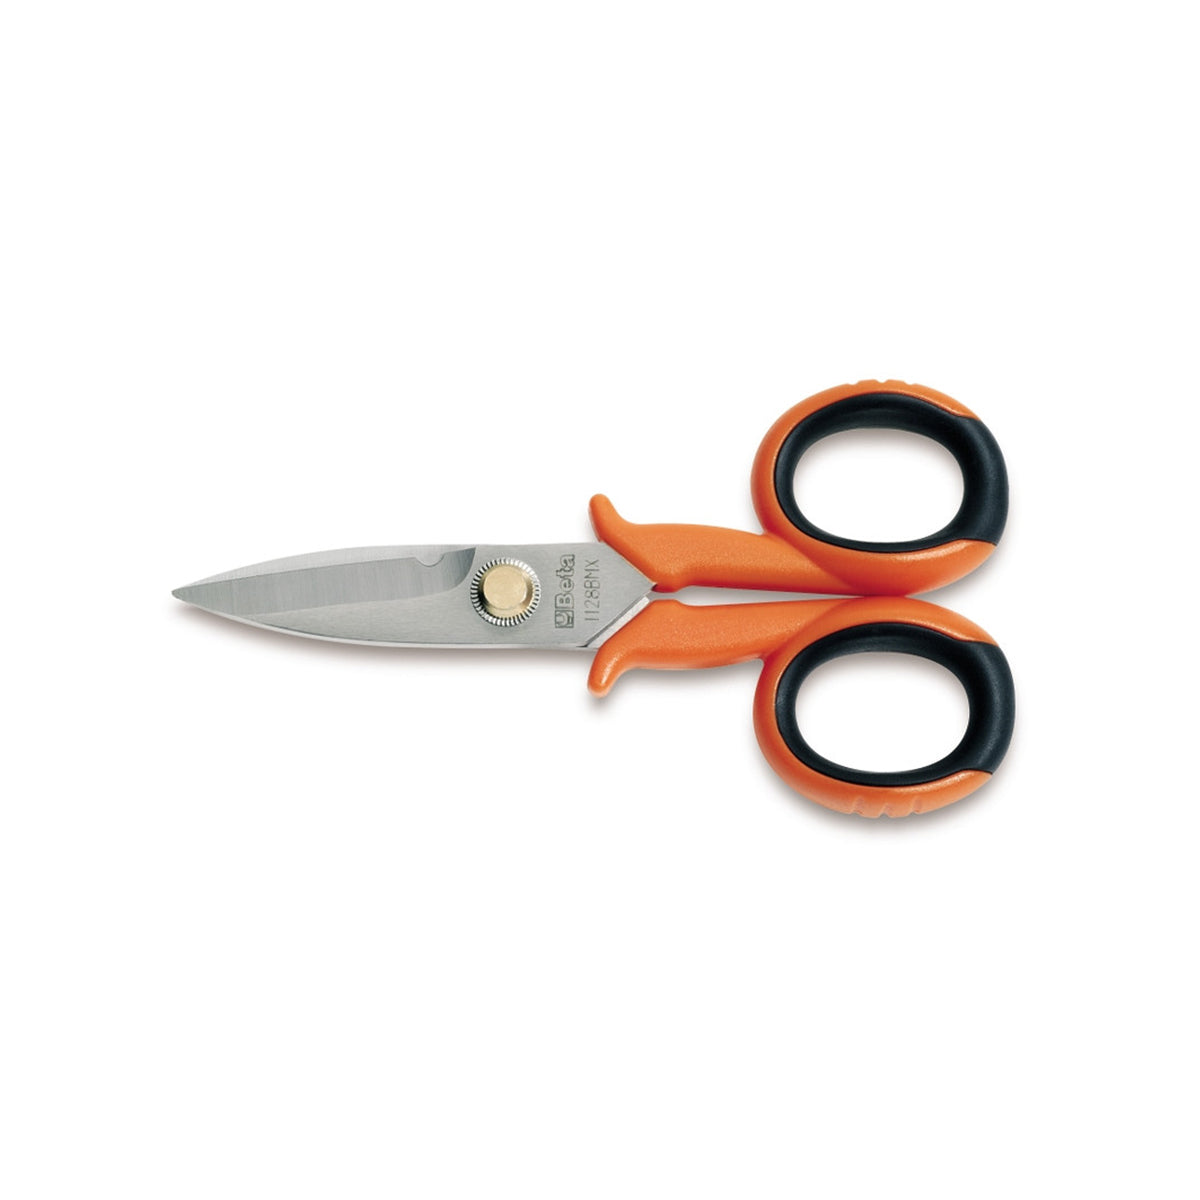 Electrician's scissors, straight stainless steel blades, with microteeth - Beta